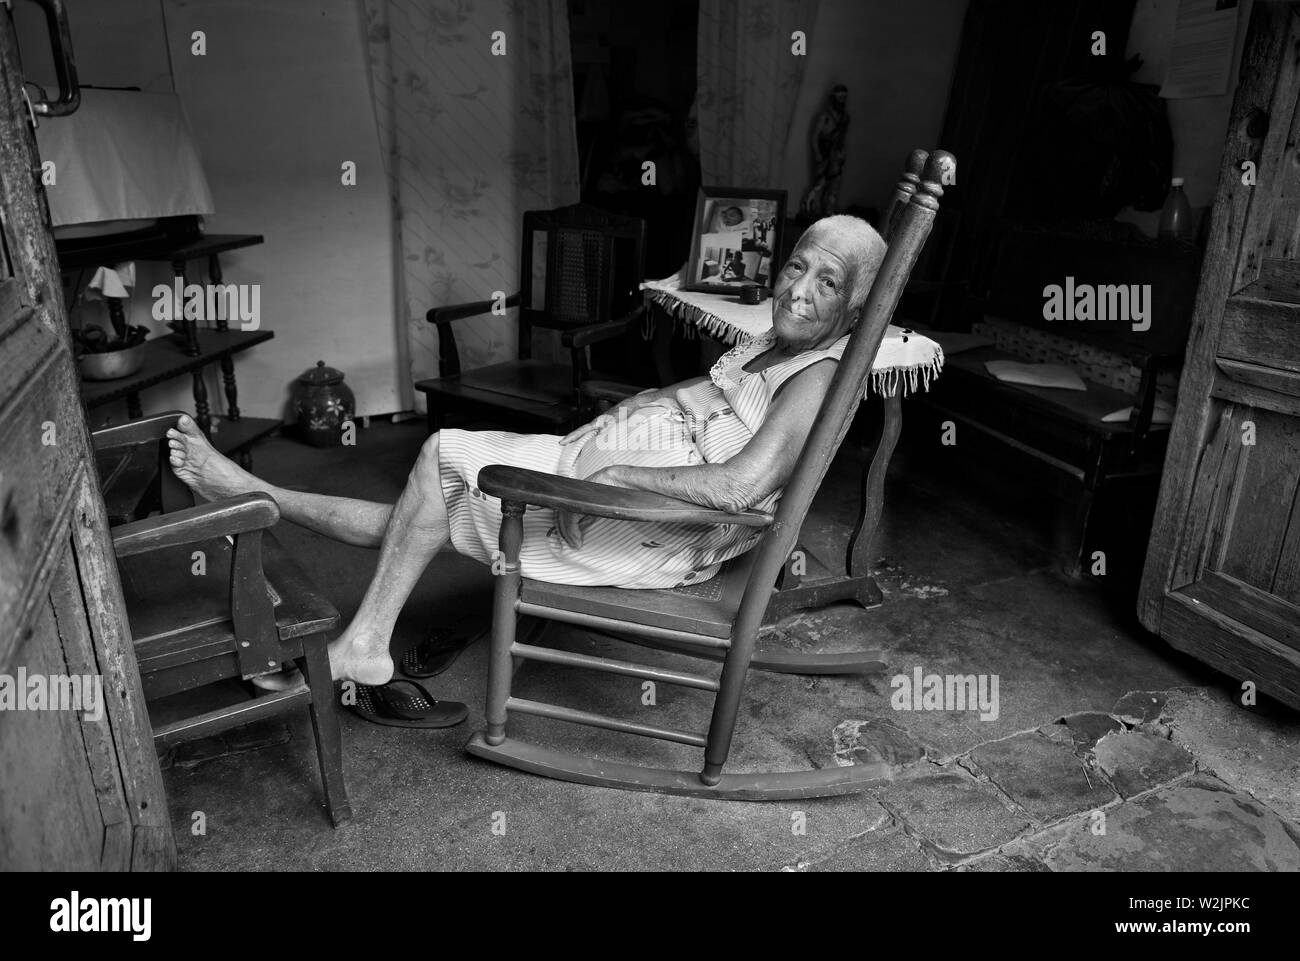 Trinidad Cuba: Lady rests in the afternoon in her rocking chair looking on as the world paases her by. Stock Photo